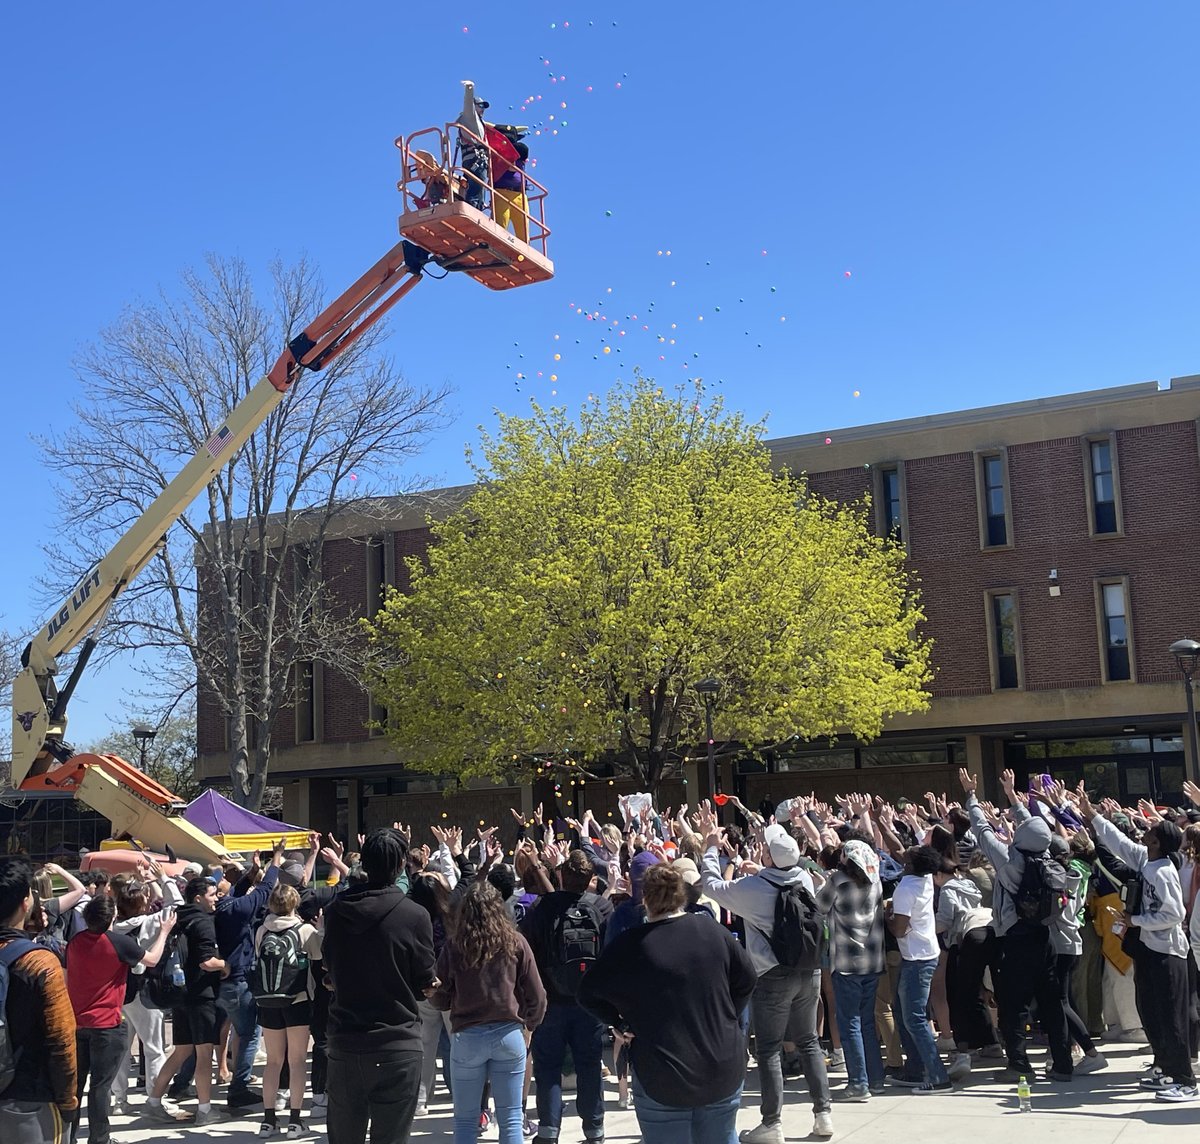 The CSU Mall Fest Wednesday was a sunny and vibrant area of fun activities on campus including a petting zoo, free barbecue, live music, and Stomper's elevated '1,000 Ways to Win.'